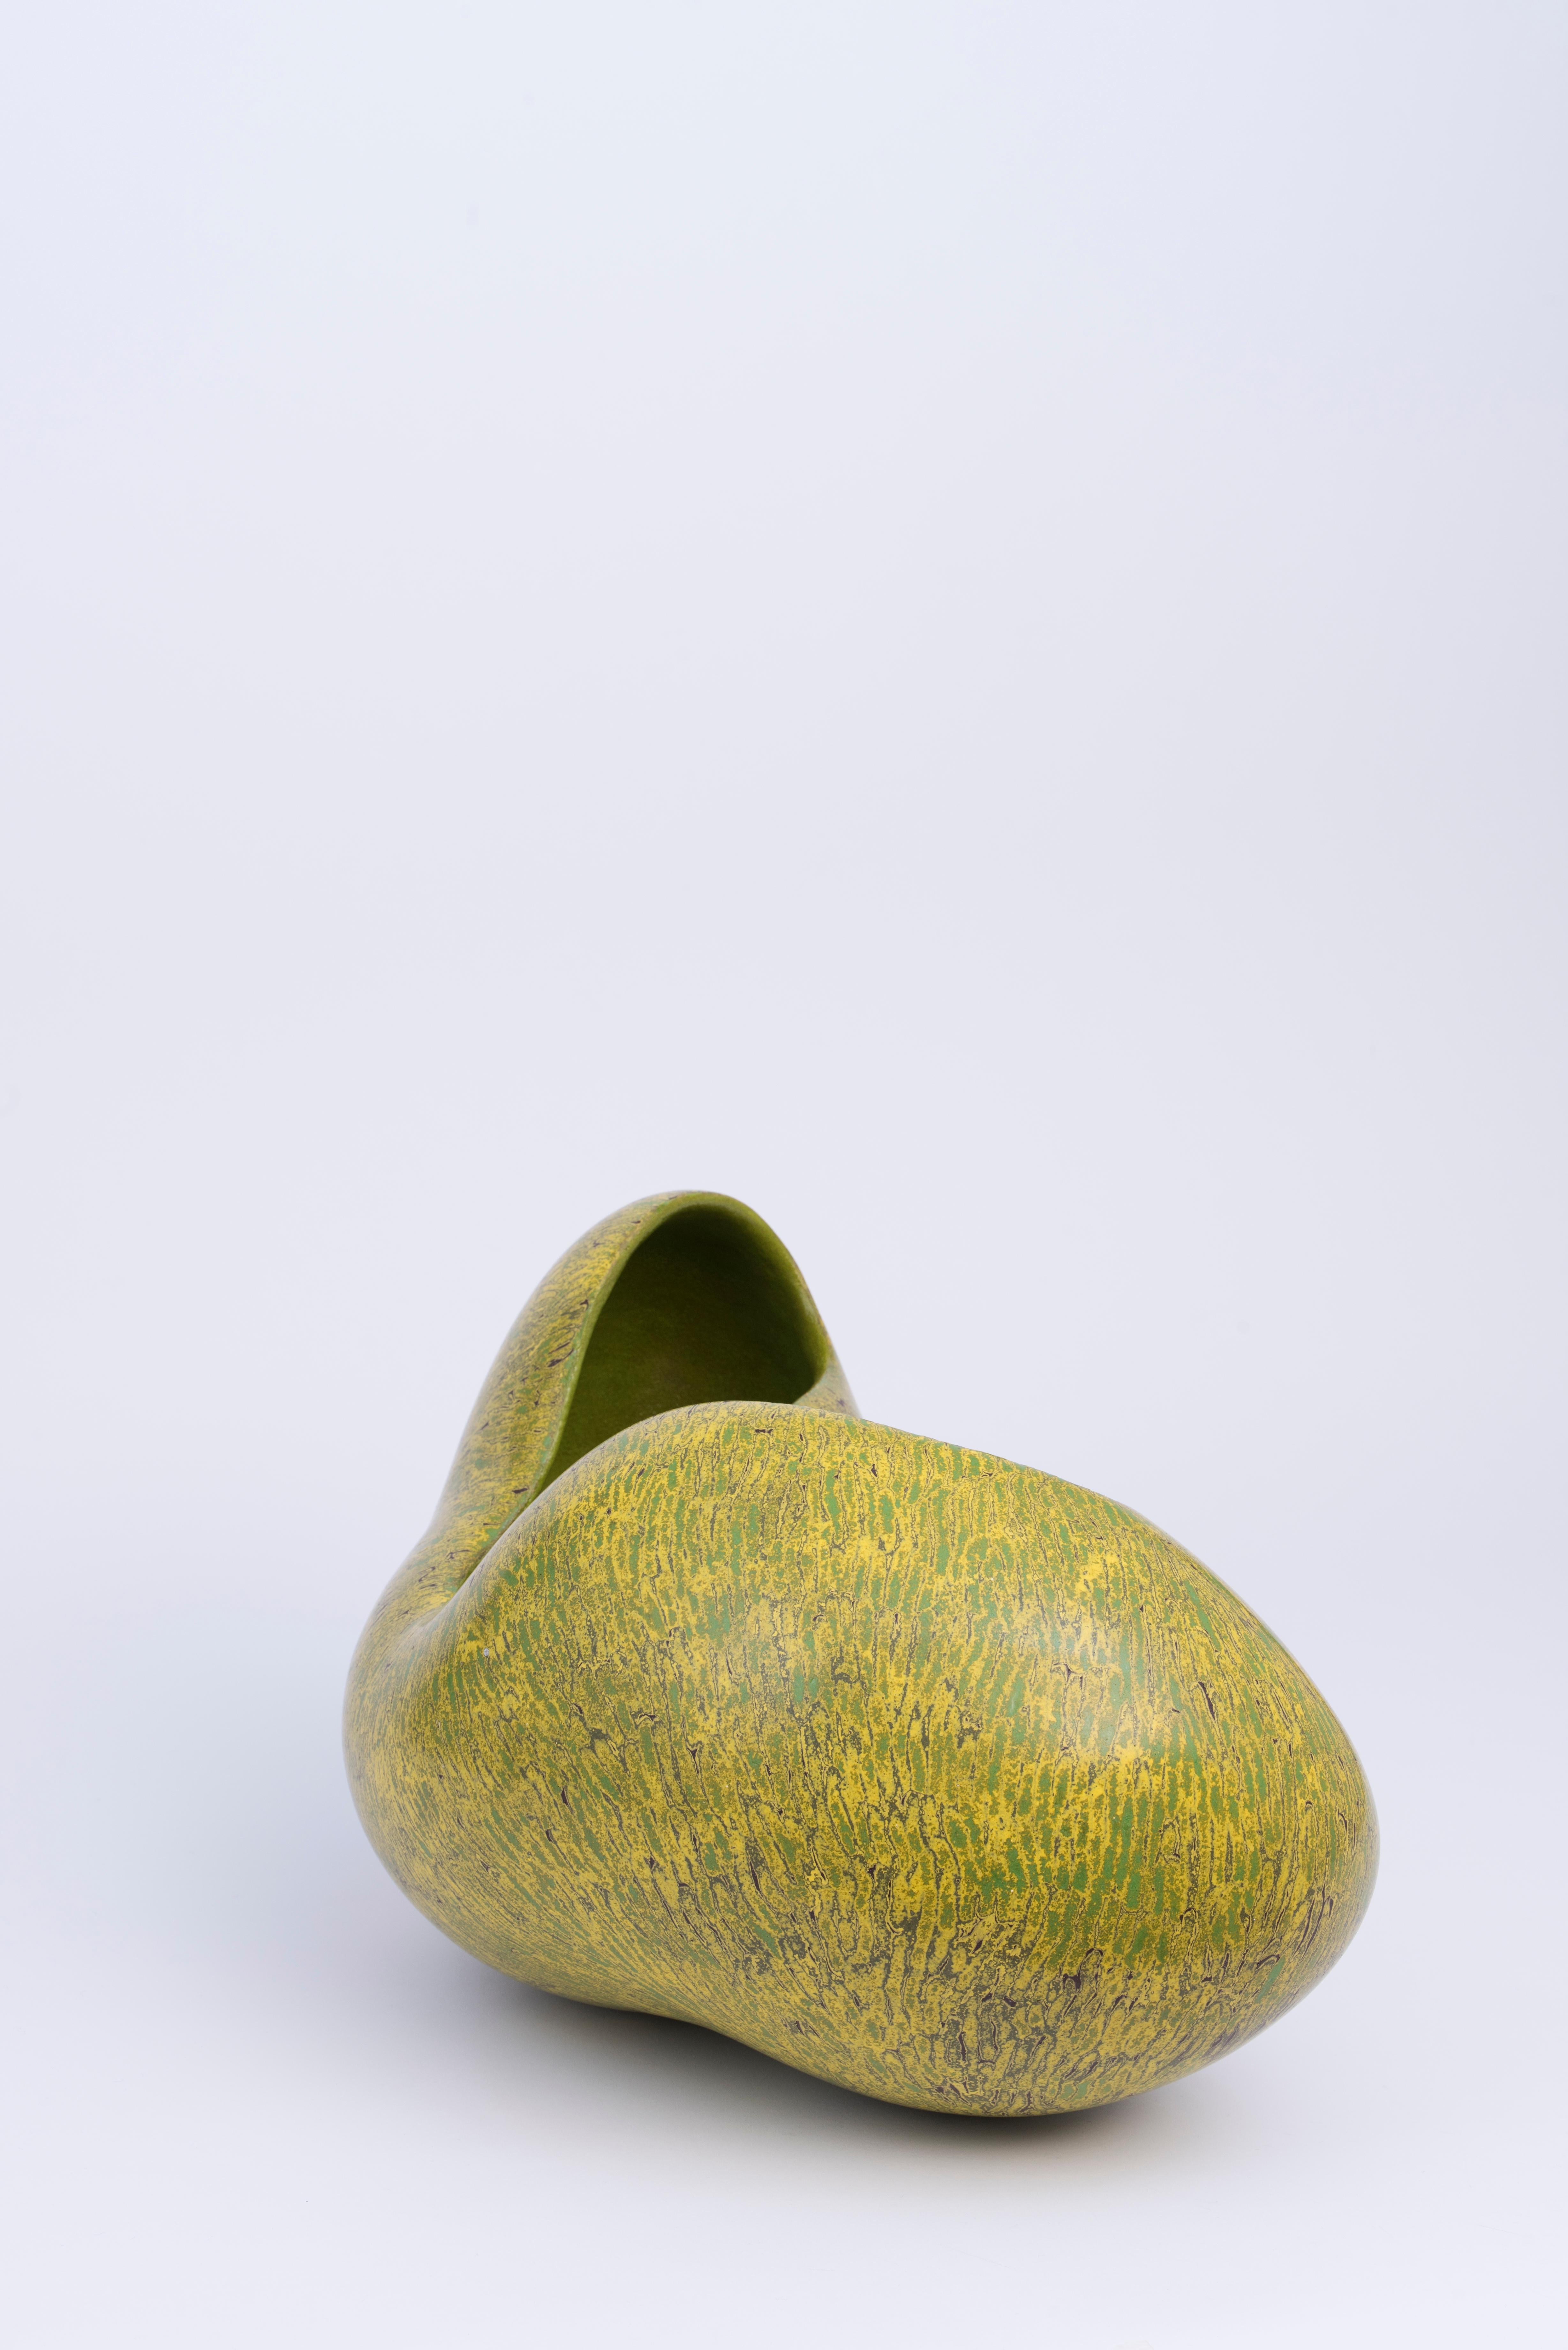 Contemporary Organic Green Vessel, Sangwoo Kim For Sale